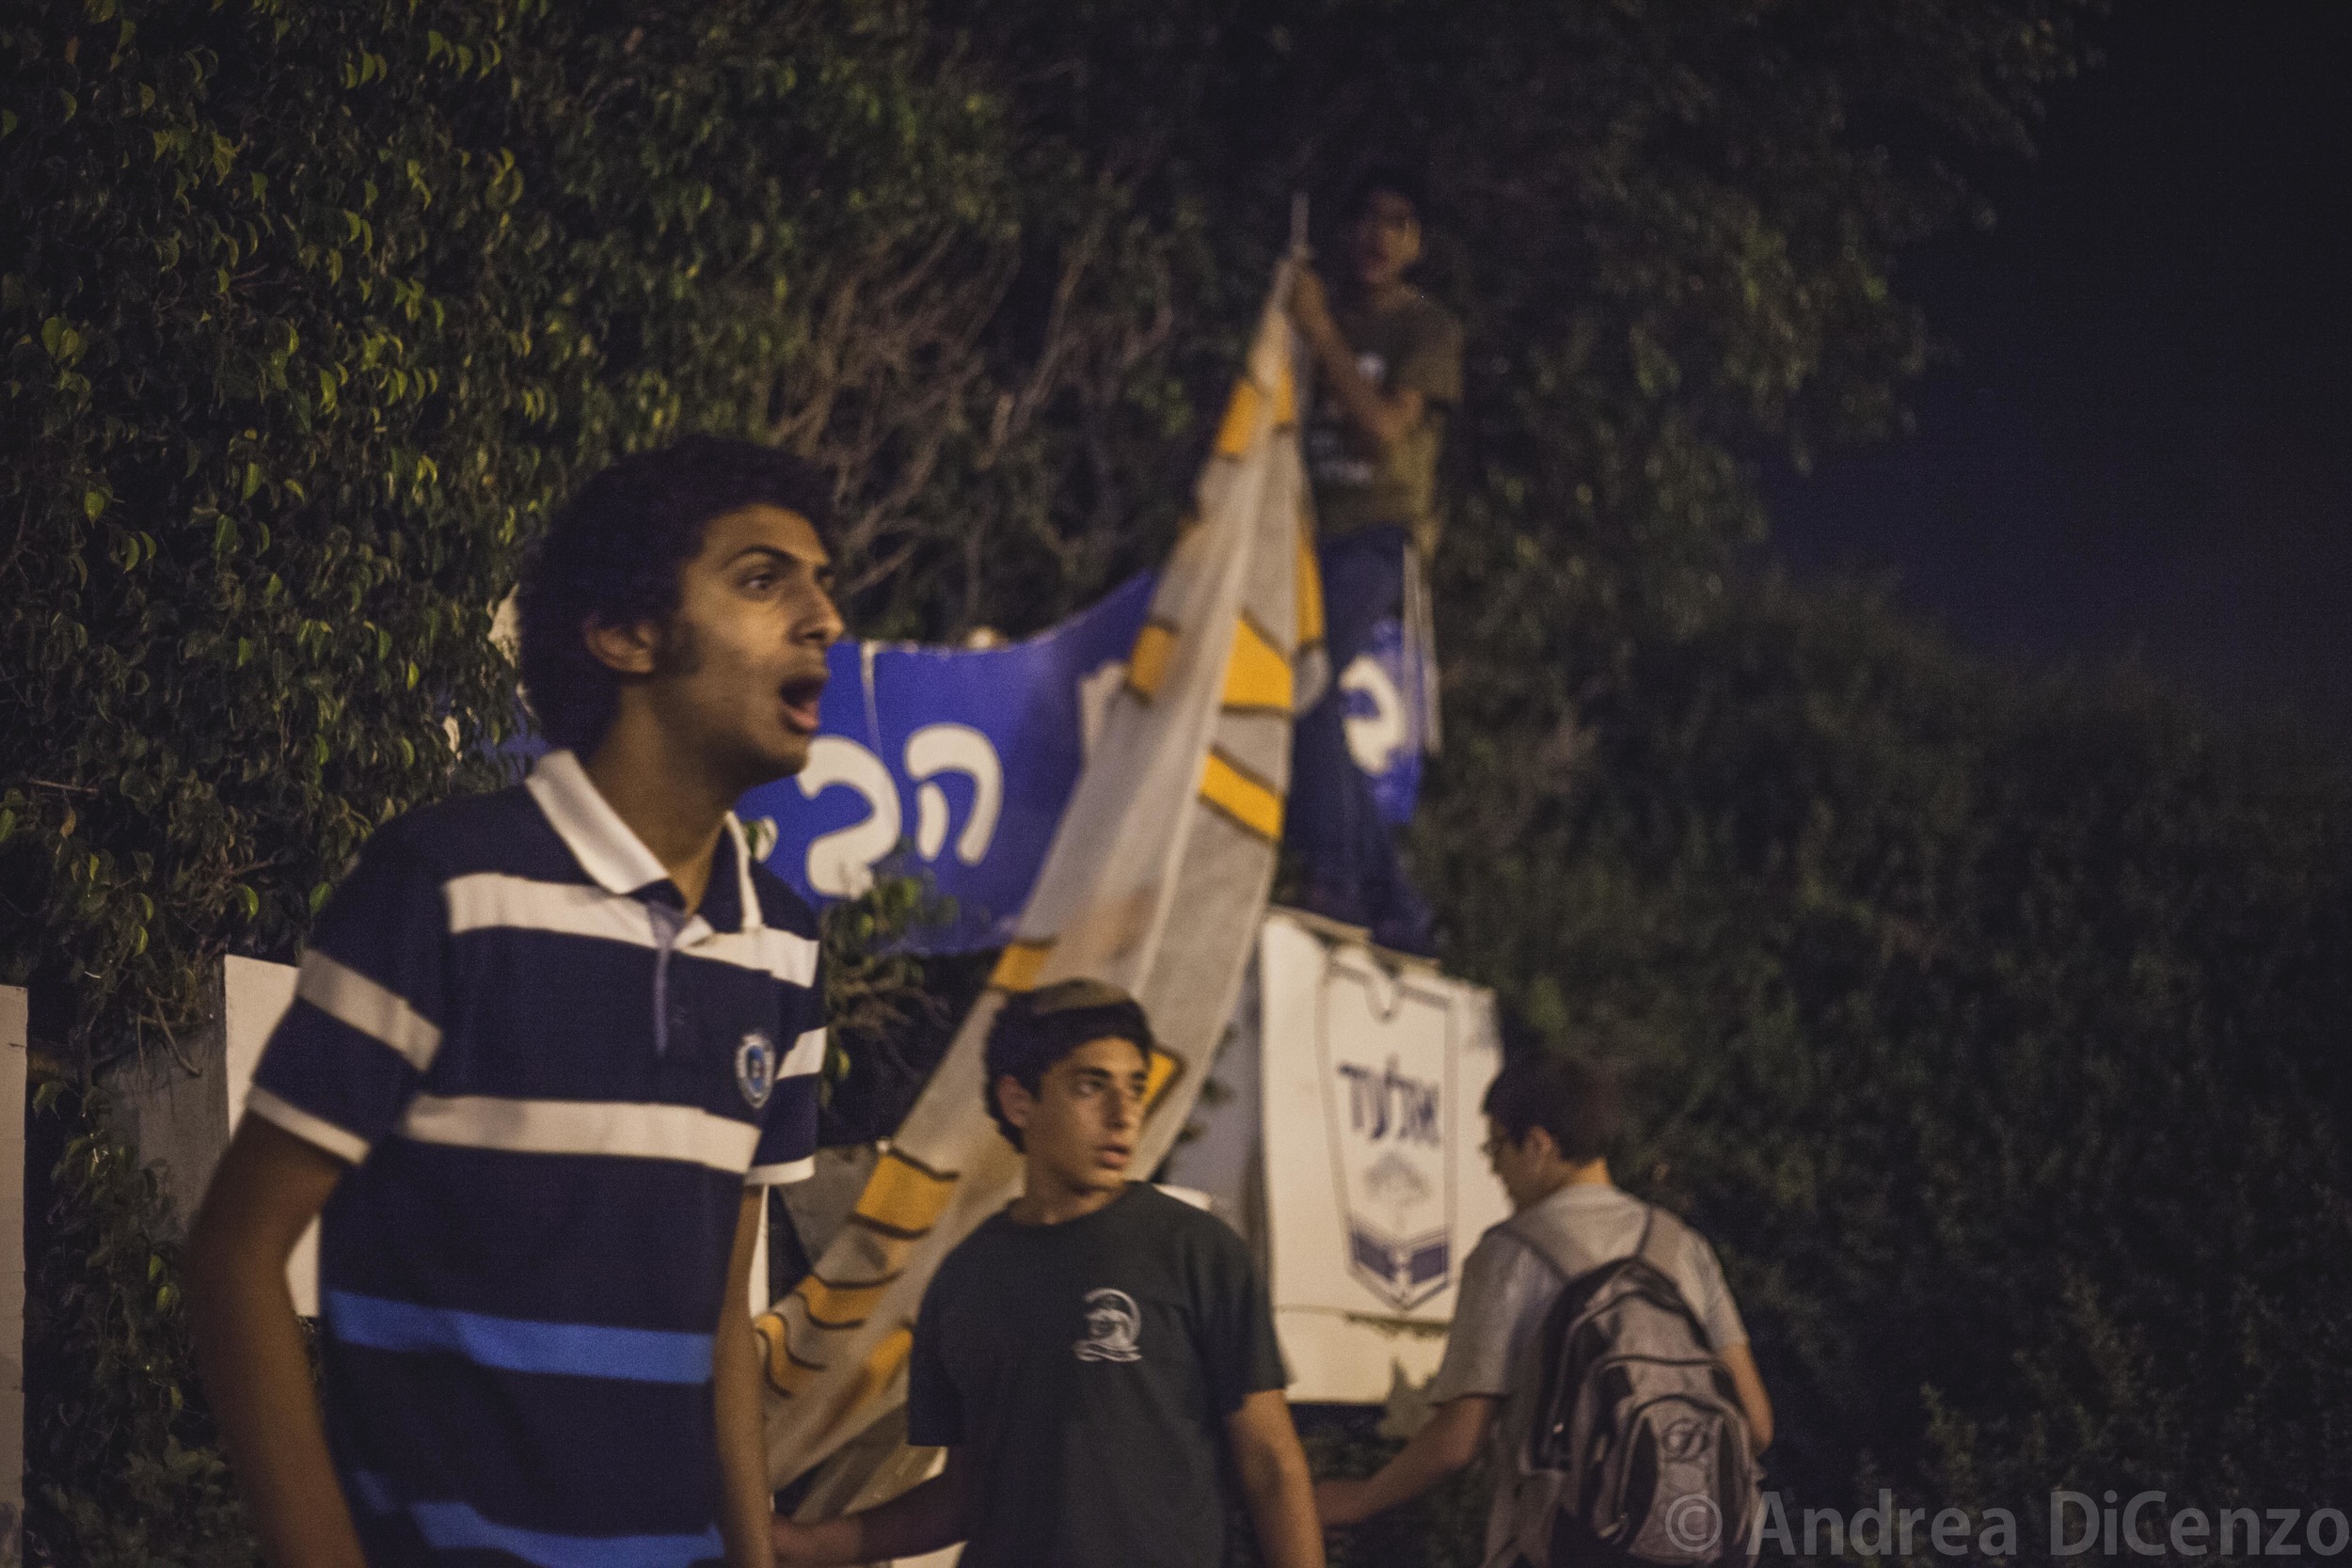  A group of boys from the Israeli settlement of El Ad&nbsp;cautiously addresses&nbsp;strangers passing by as they try to erect a large homemade banner on the evening the bodies of the three missing Israeli teenagers were discovered. 